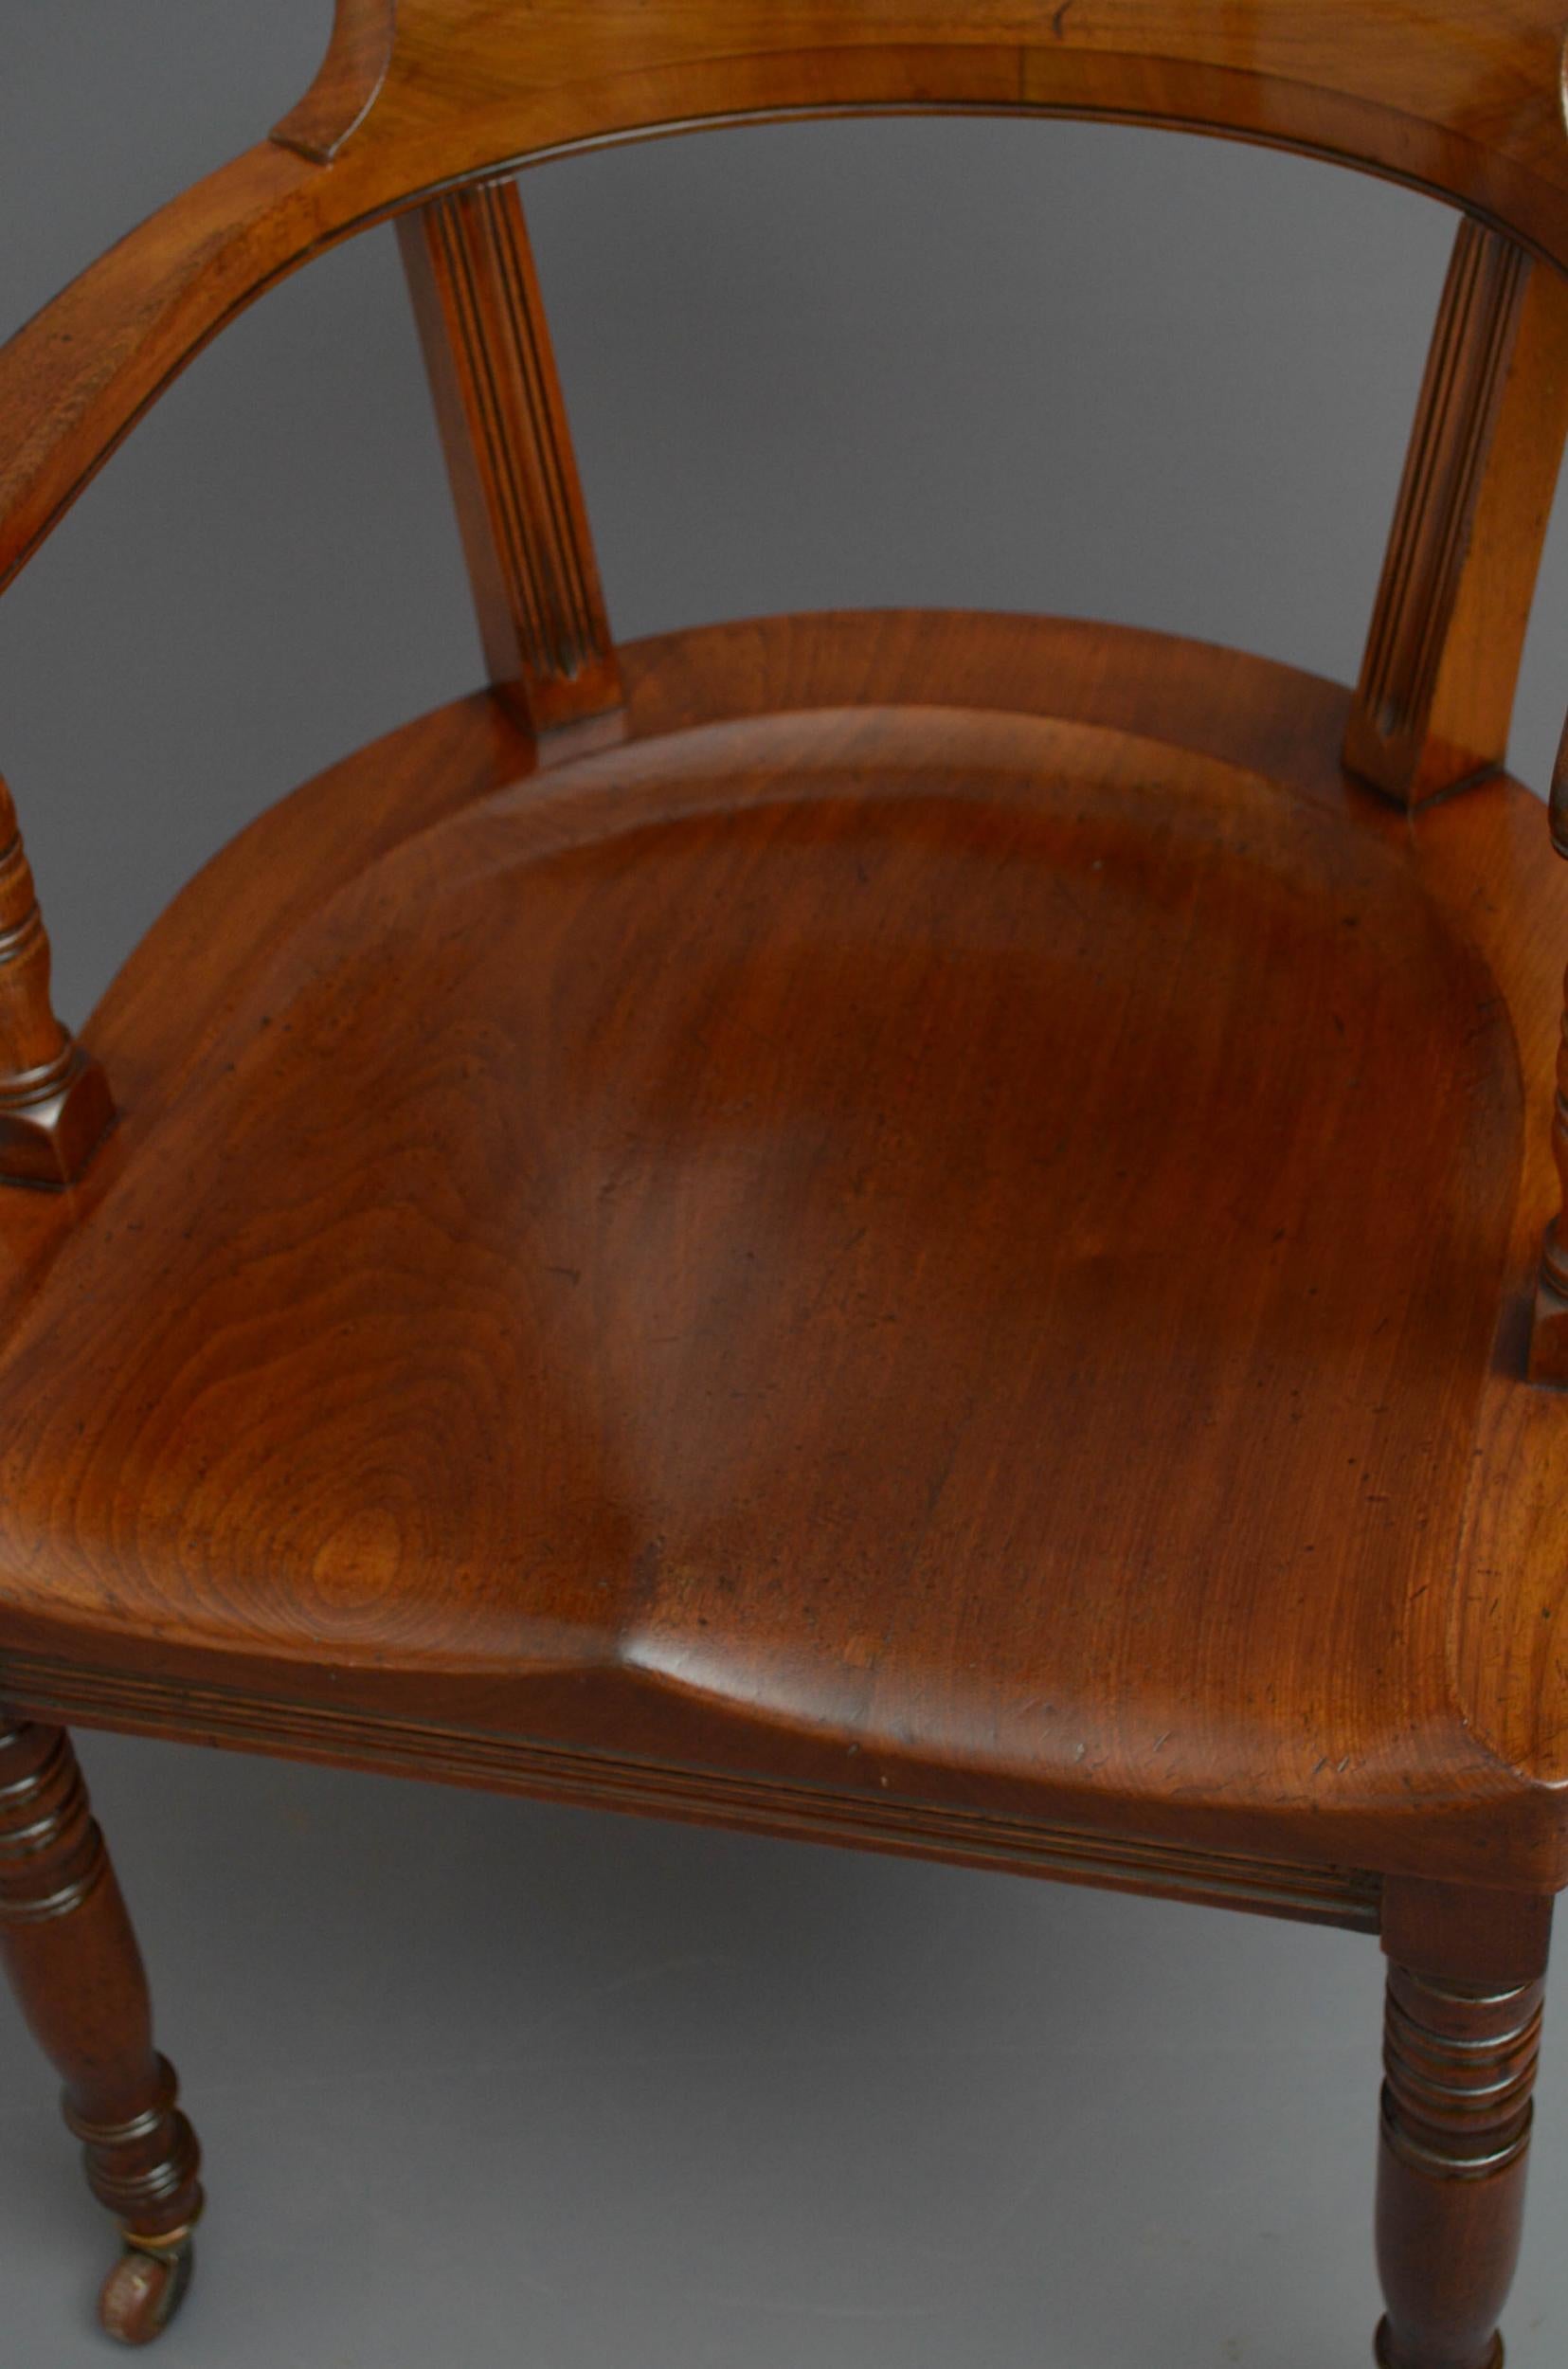 Turner, Son & Walker Late Victorian Desk or Library Chair 1